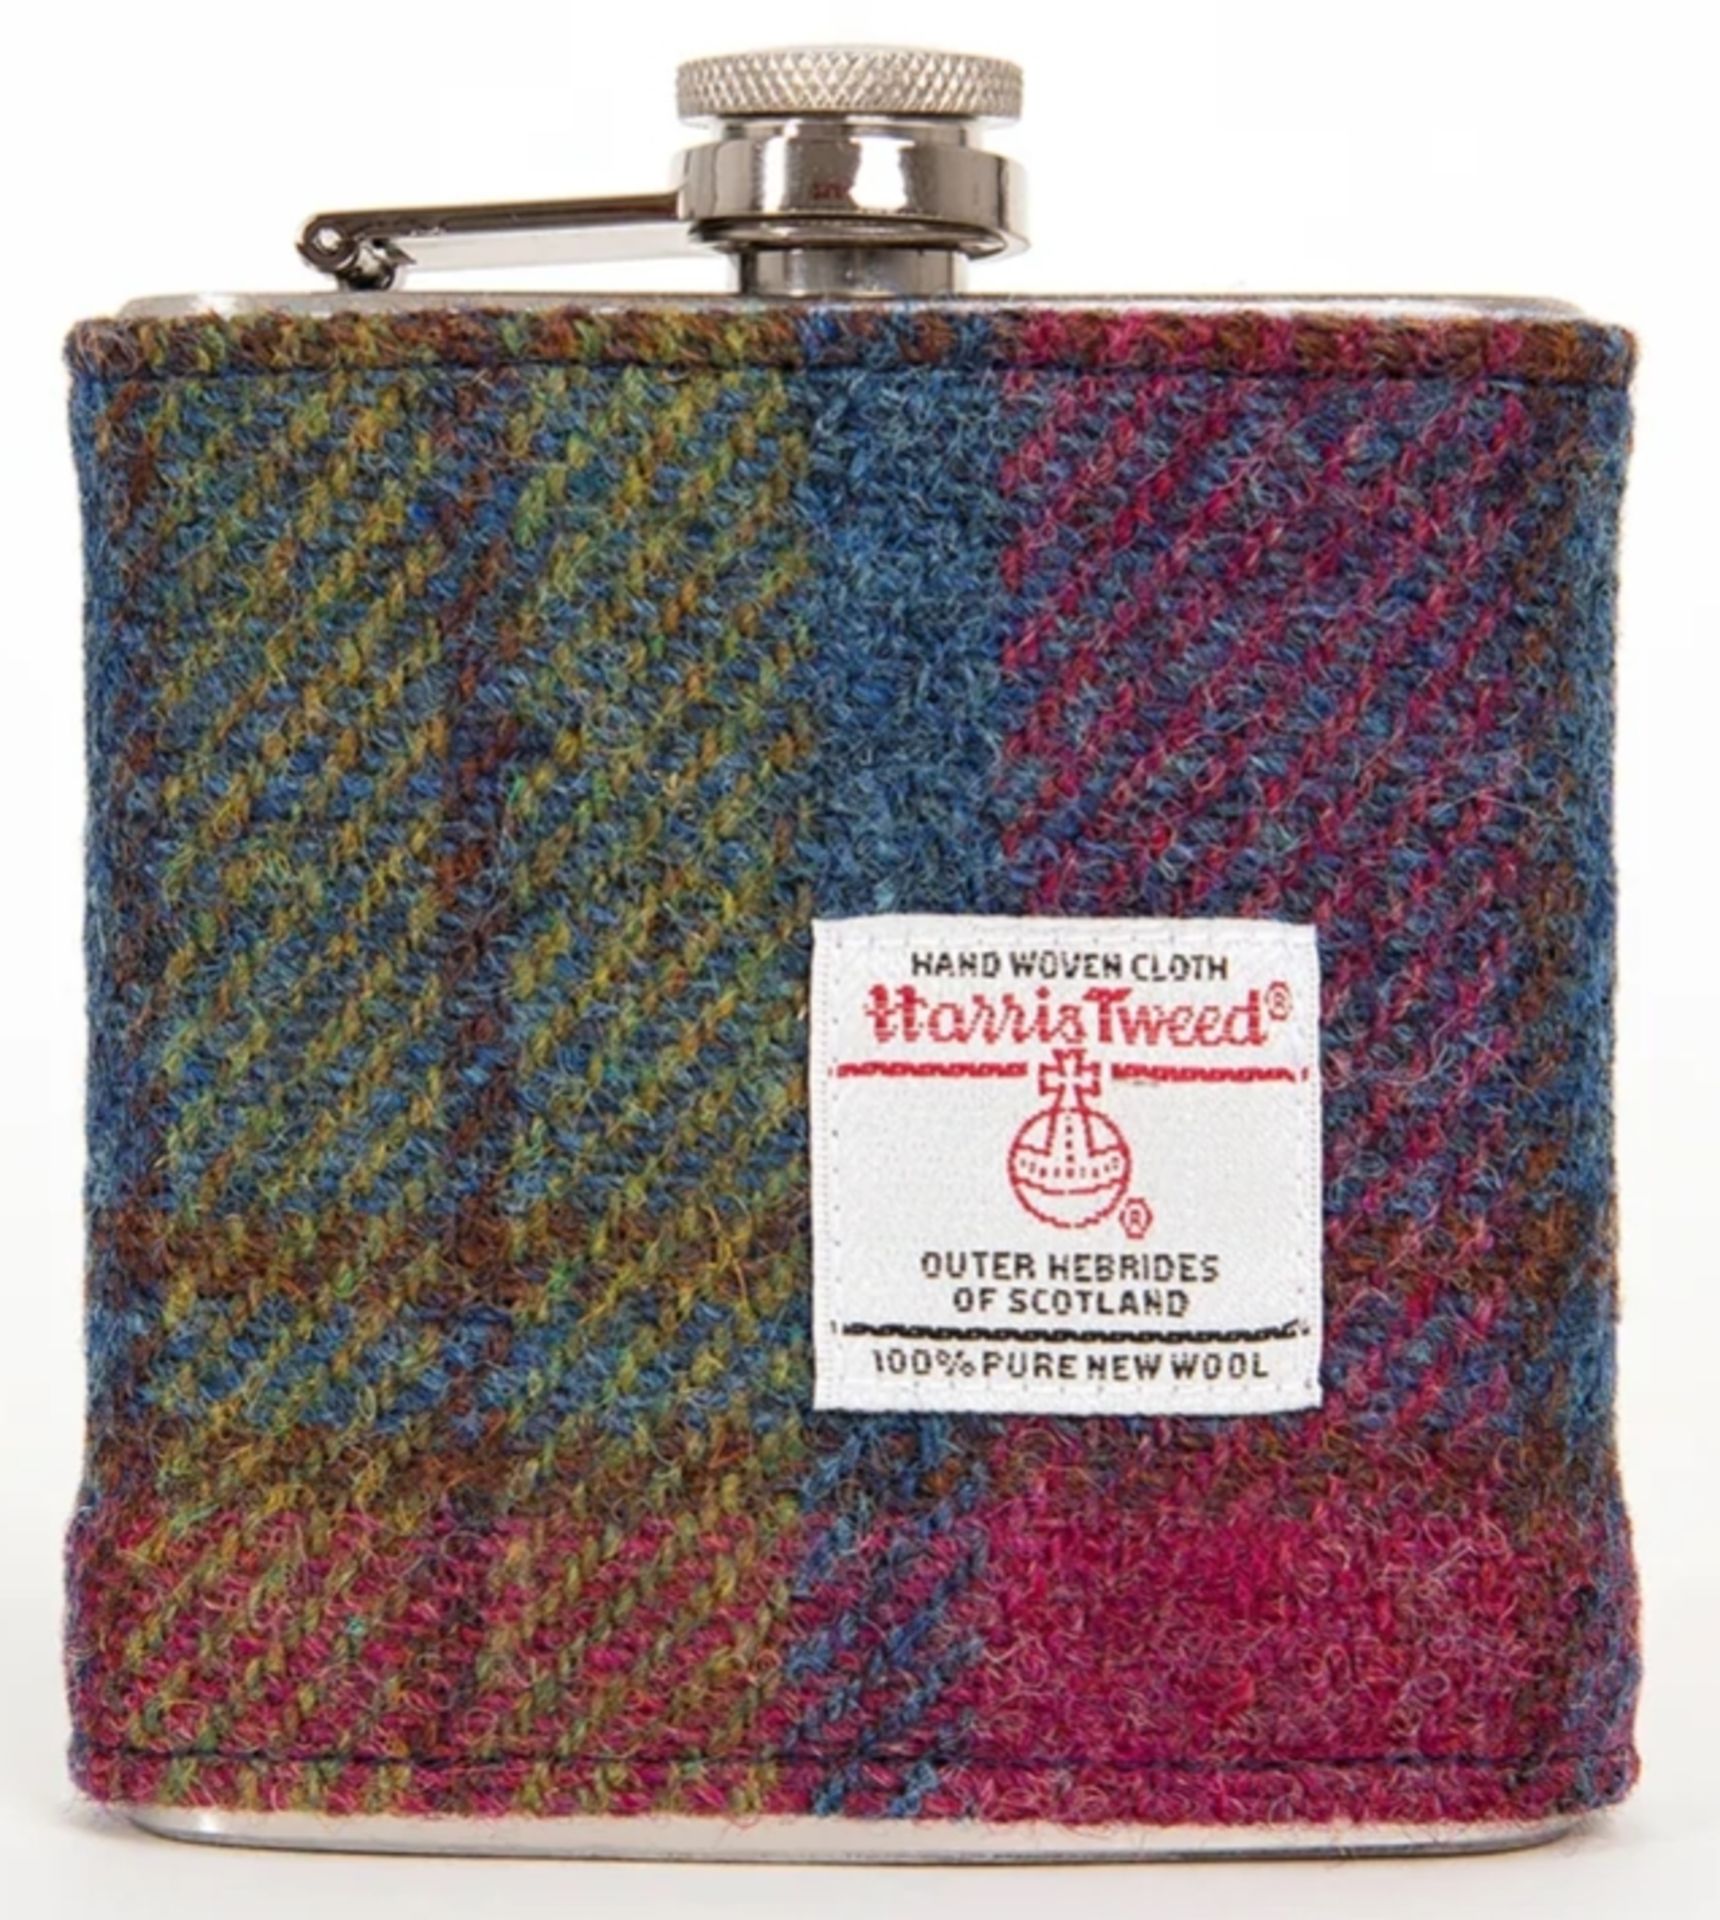 1 x Ridleys Handwoven Harris Tweed Hip Flask in Gift Box - New  - Ref: TCH223 - CL840 - Location: